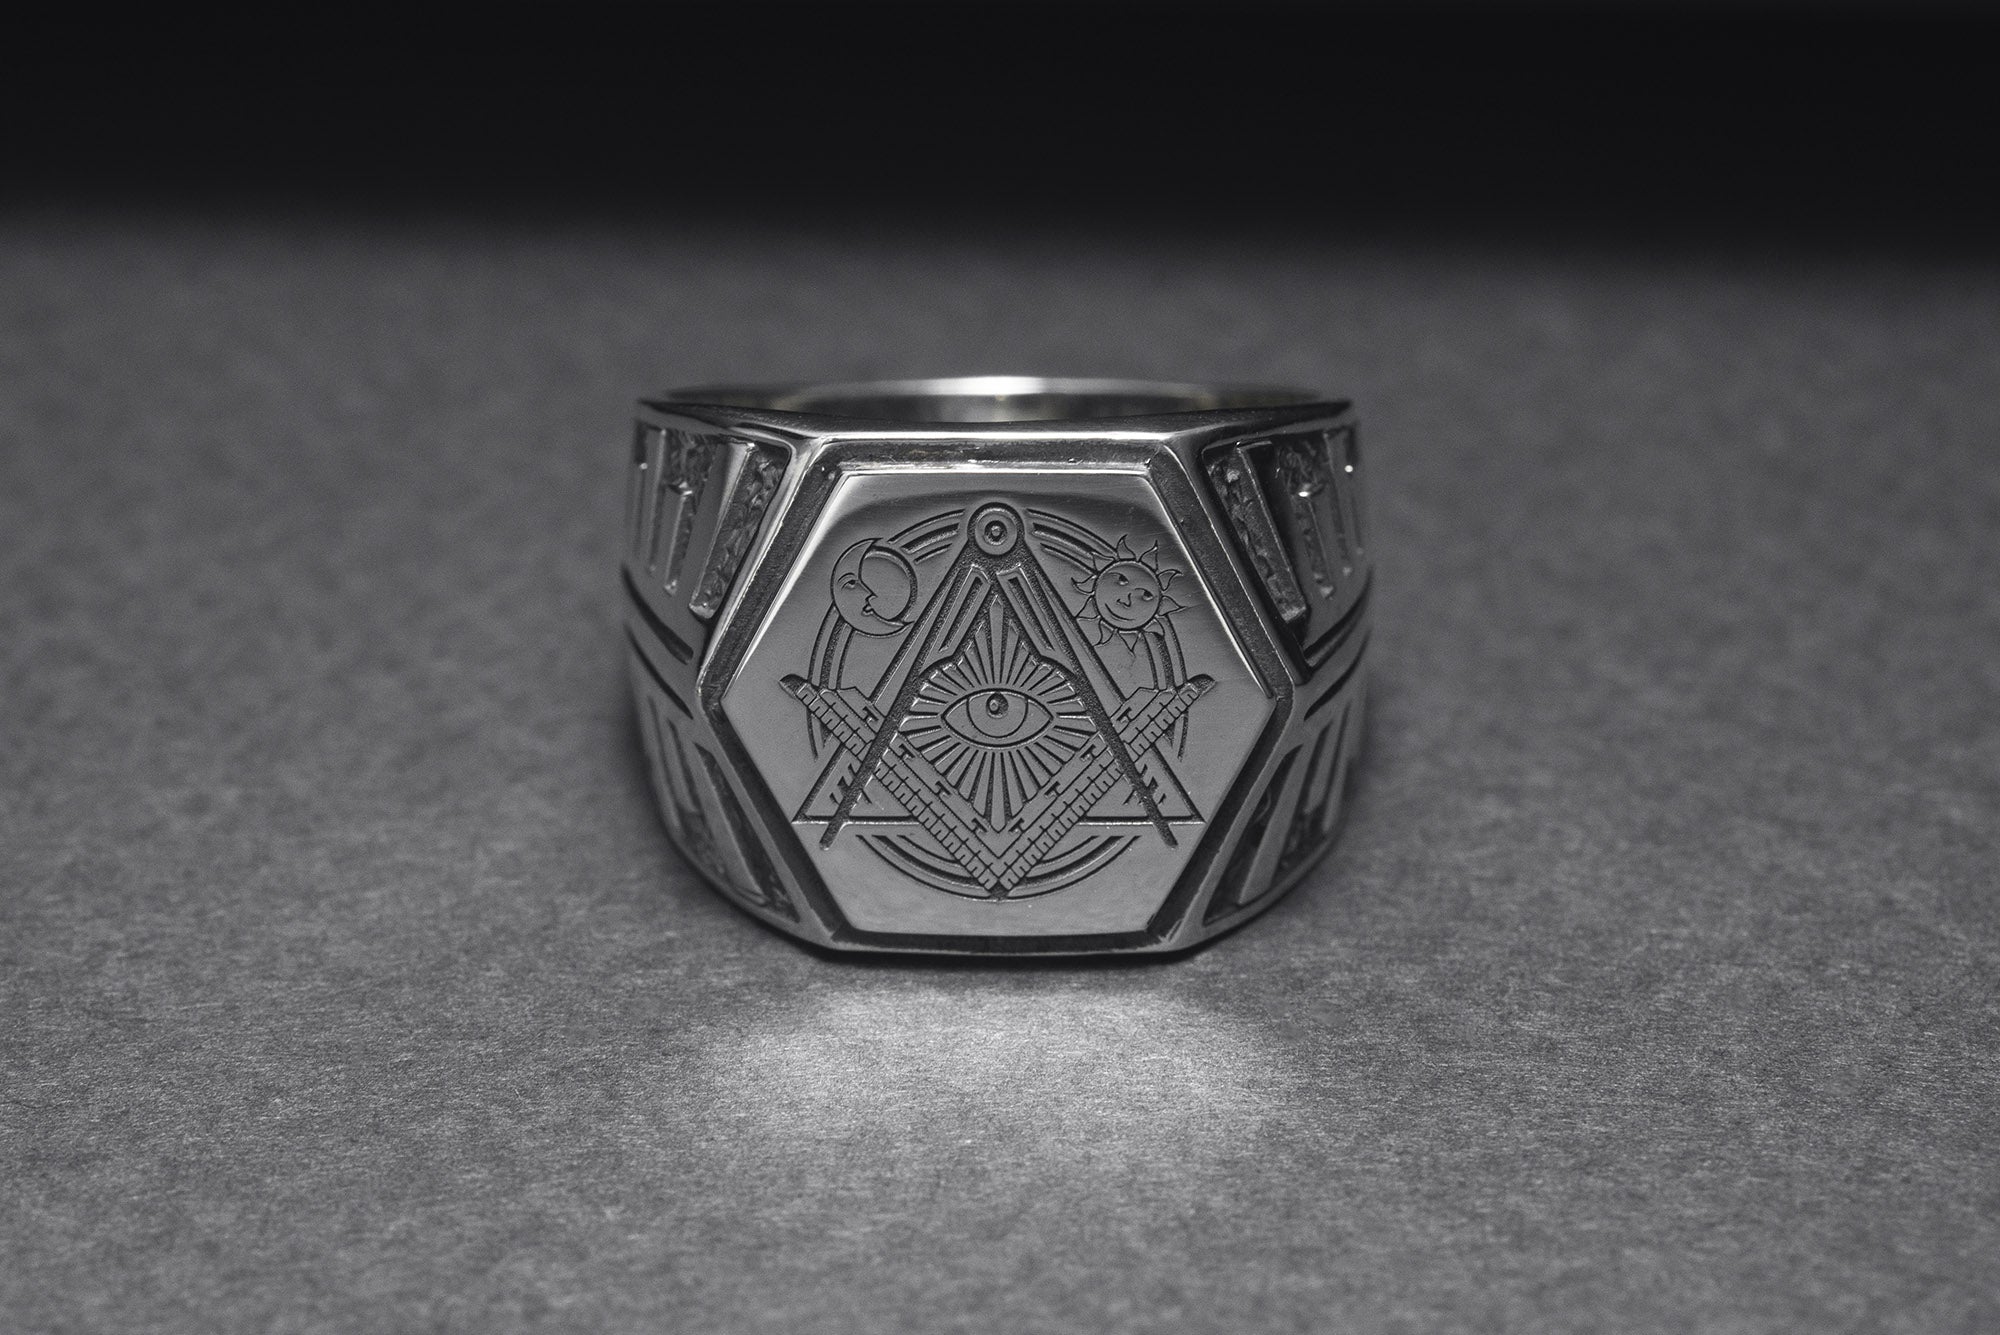 925 Silver Hexahedron Square and Compasses Signet Ring with Moon and Sun, Handmade Mason Jewelry